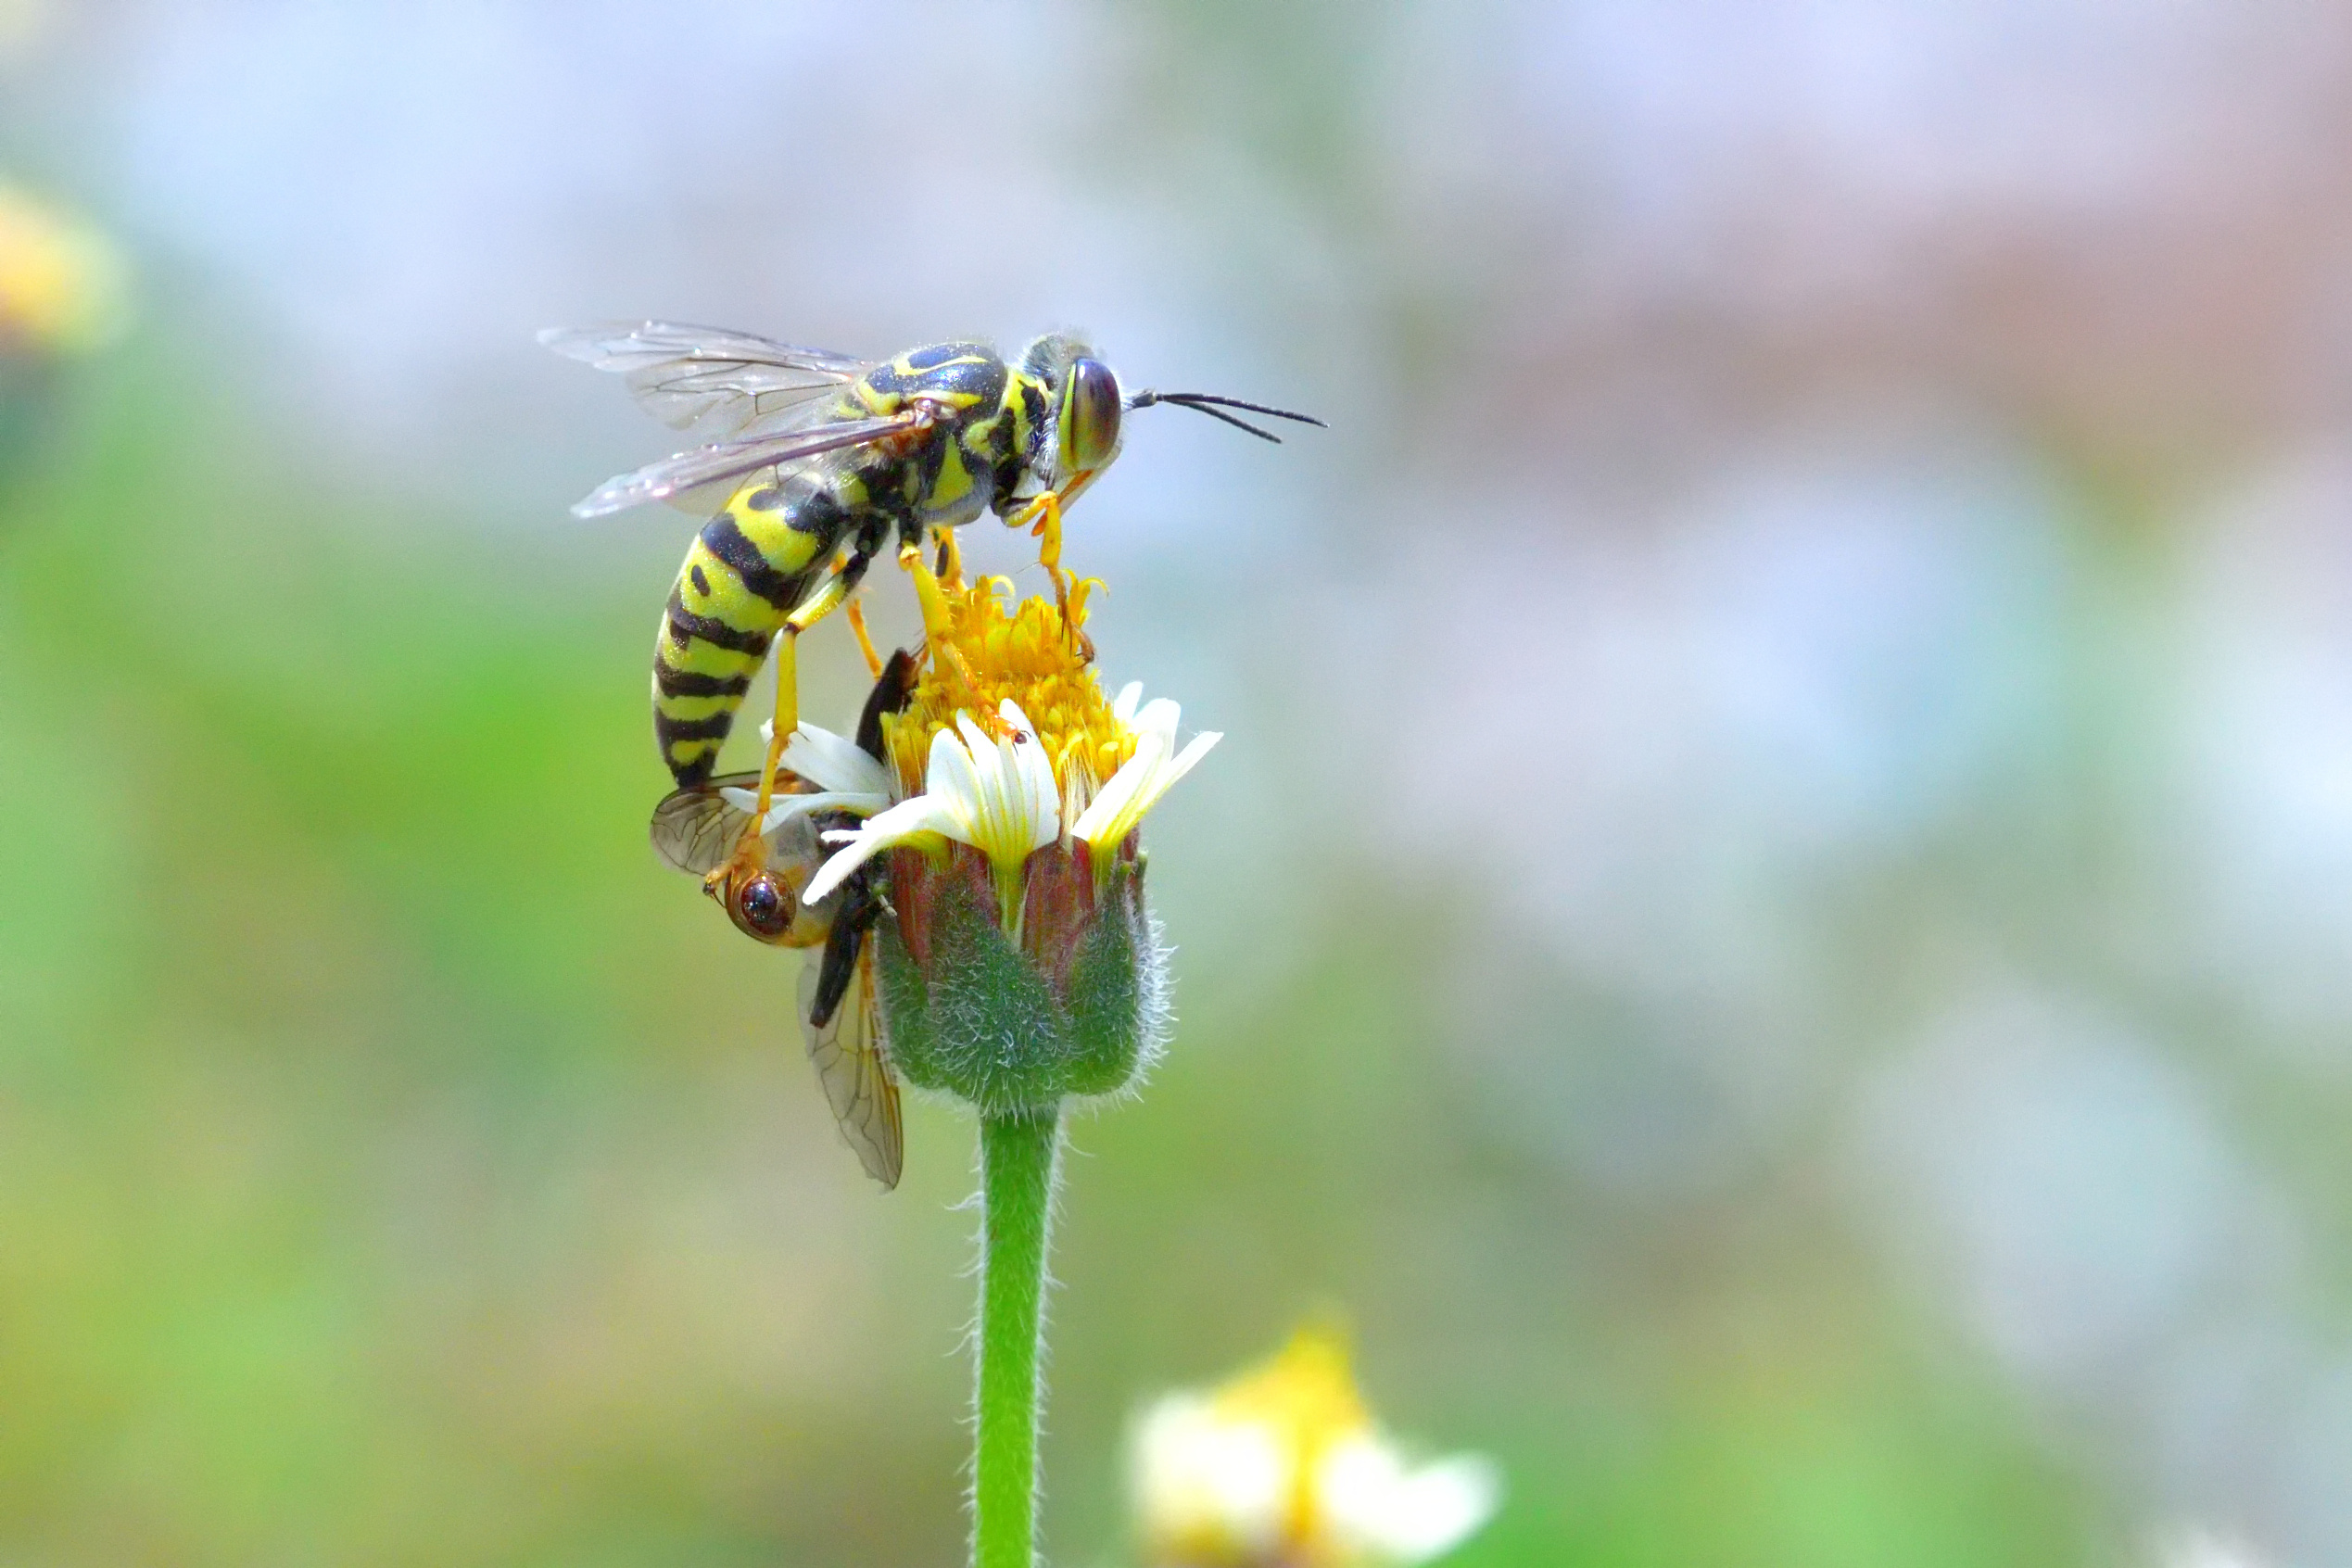 An image of a yellow jacket on a flower - we offer professional yellow jacket removal services.